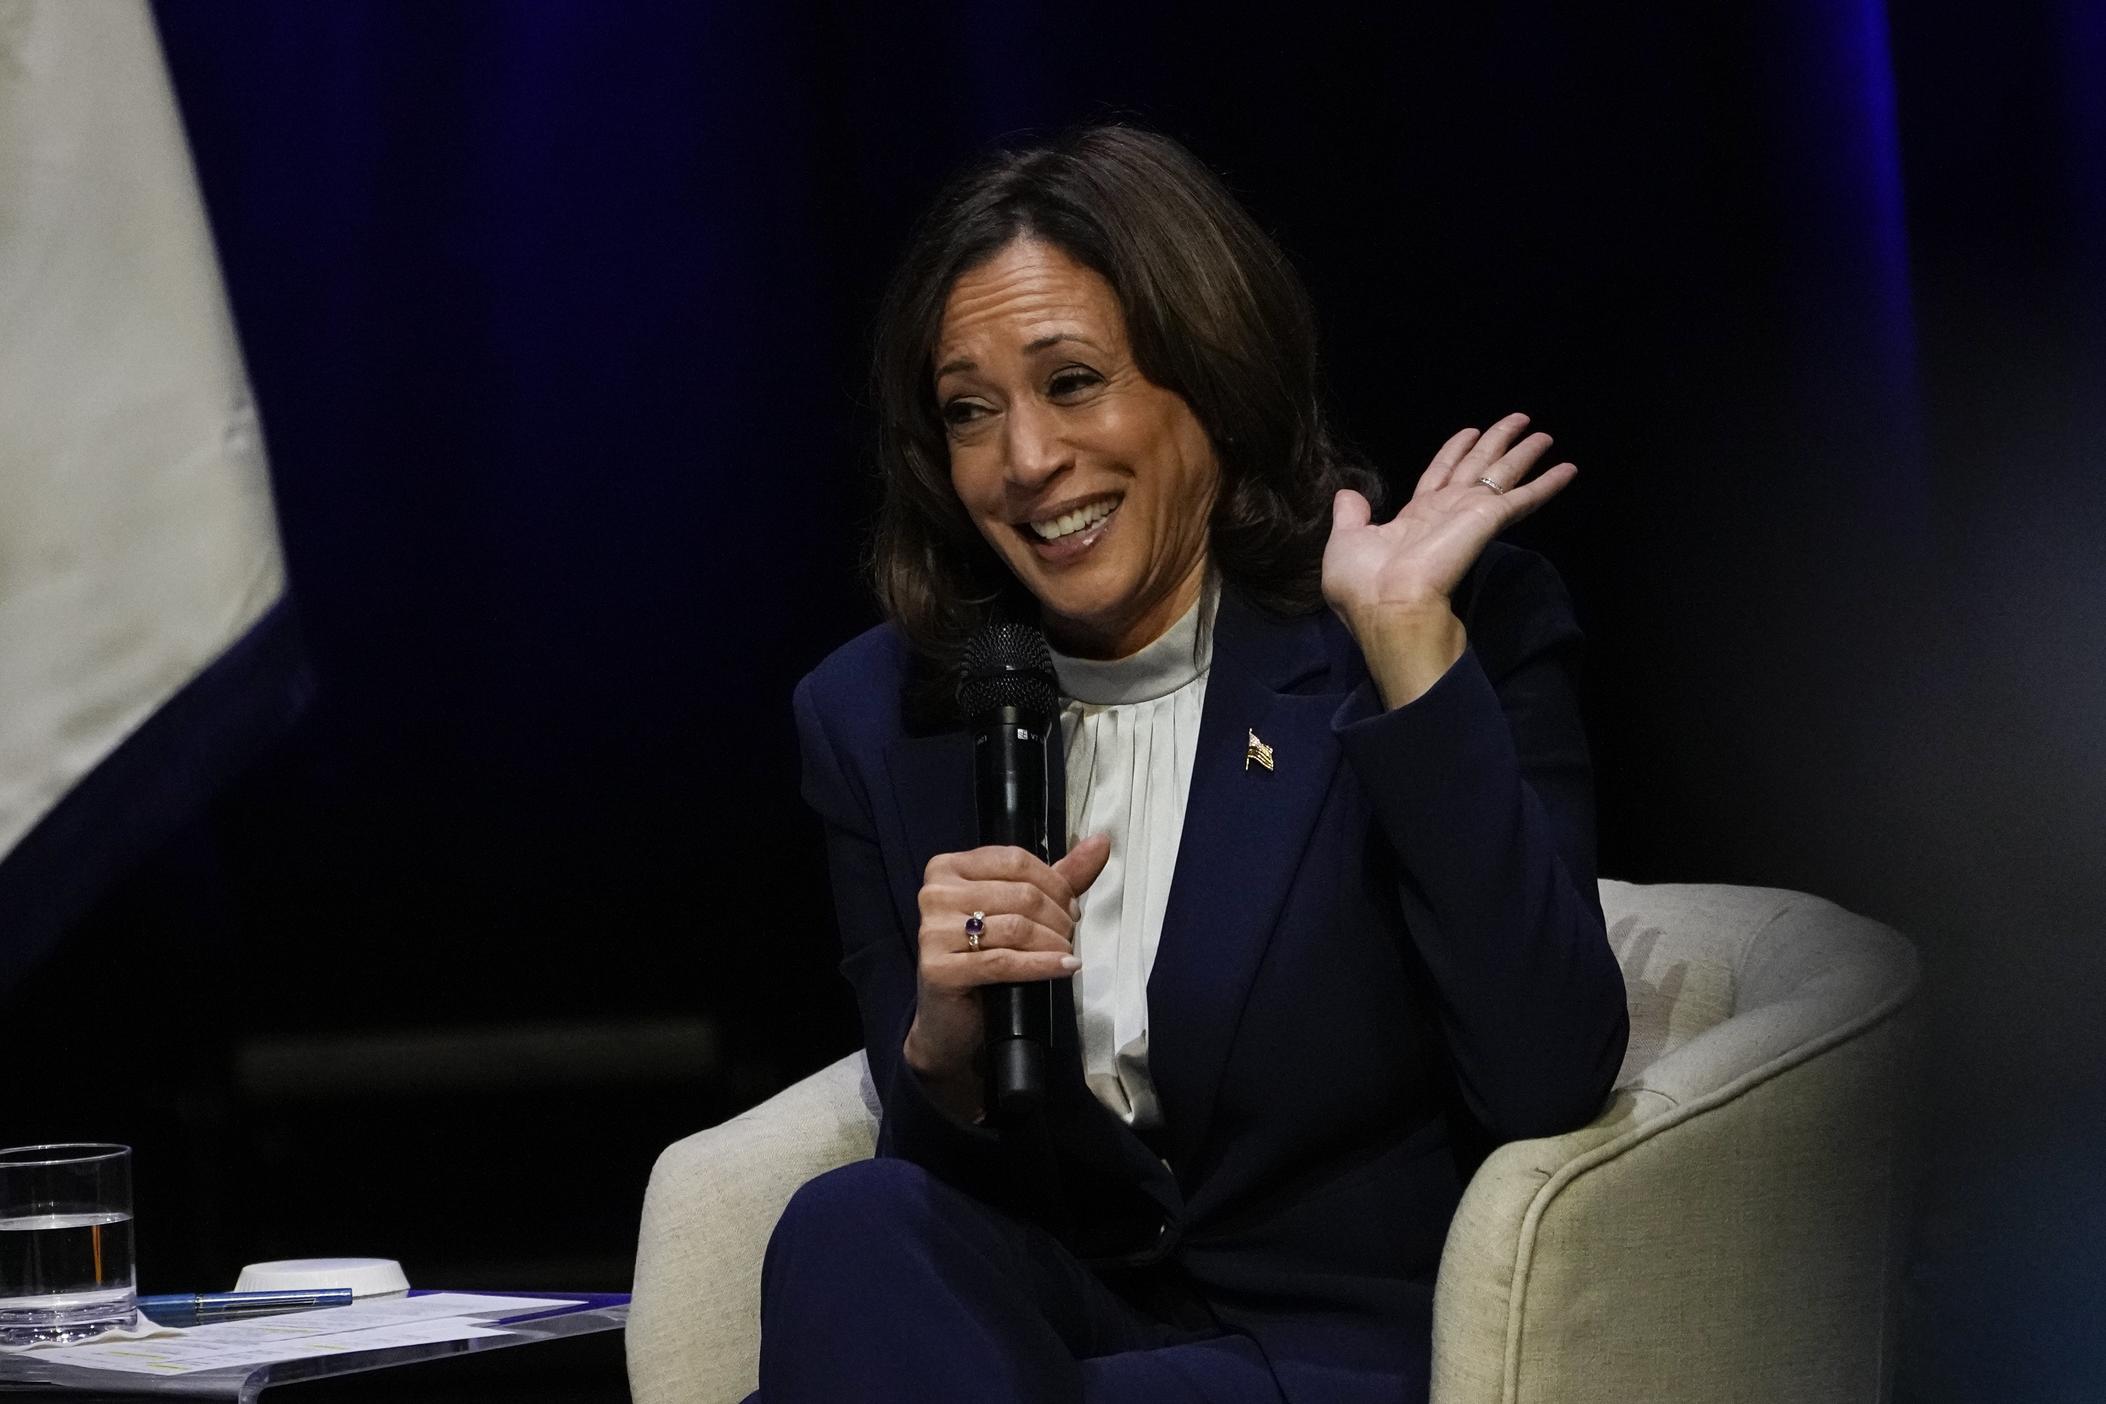 Vice President Kamala Harris laughs as she talks about climate change at Georgia Tech on Wednesday, Feb. 8, 2023, in Atlanta.